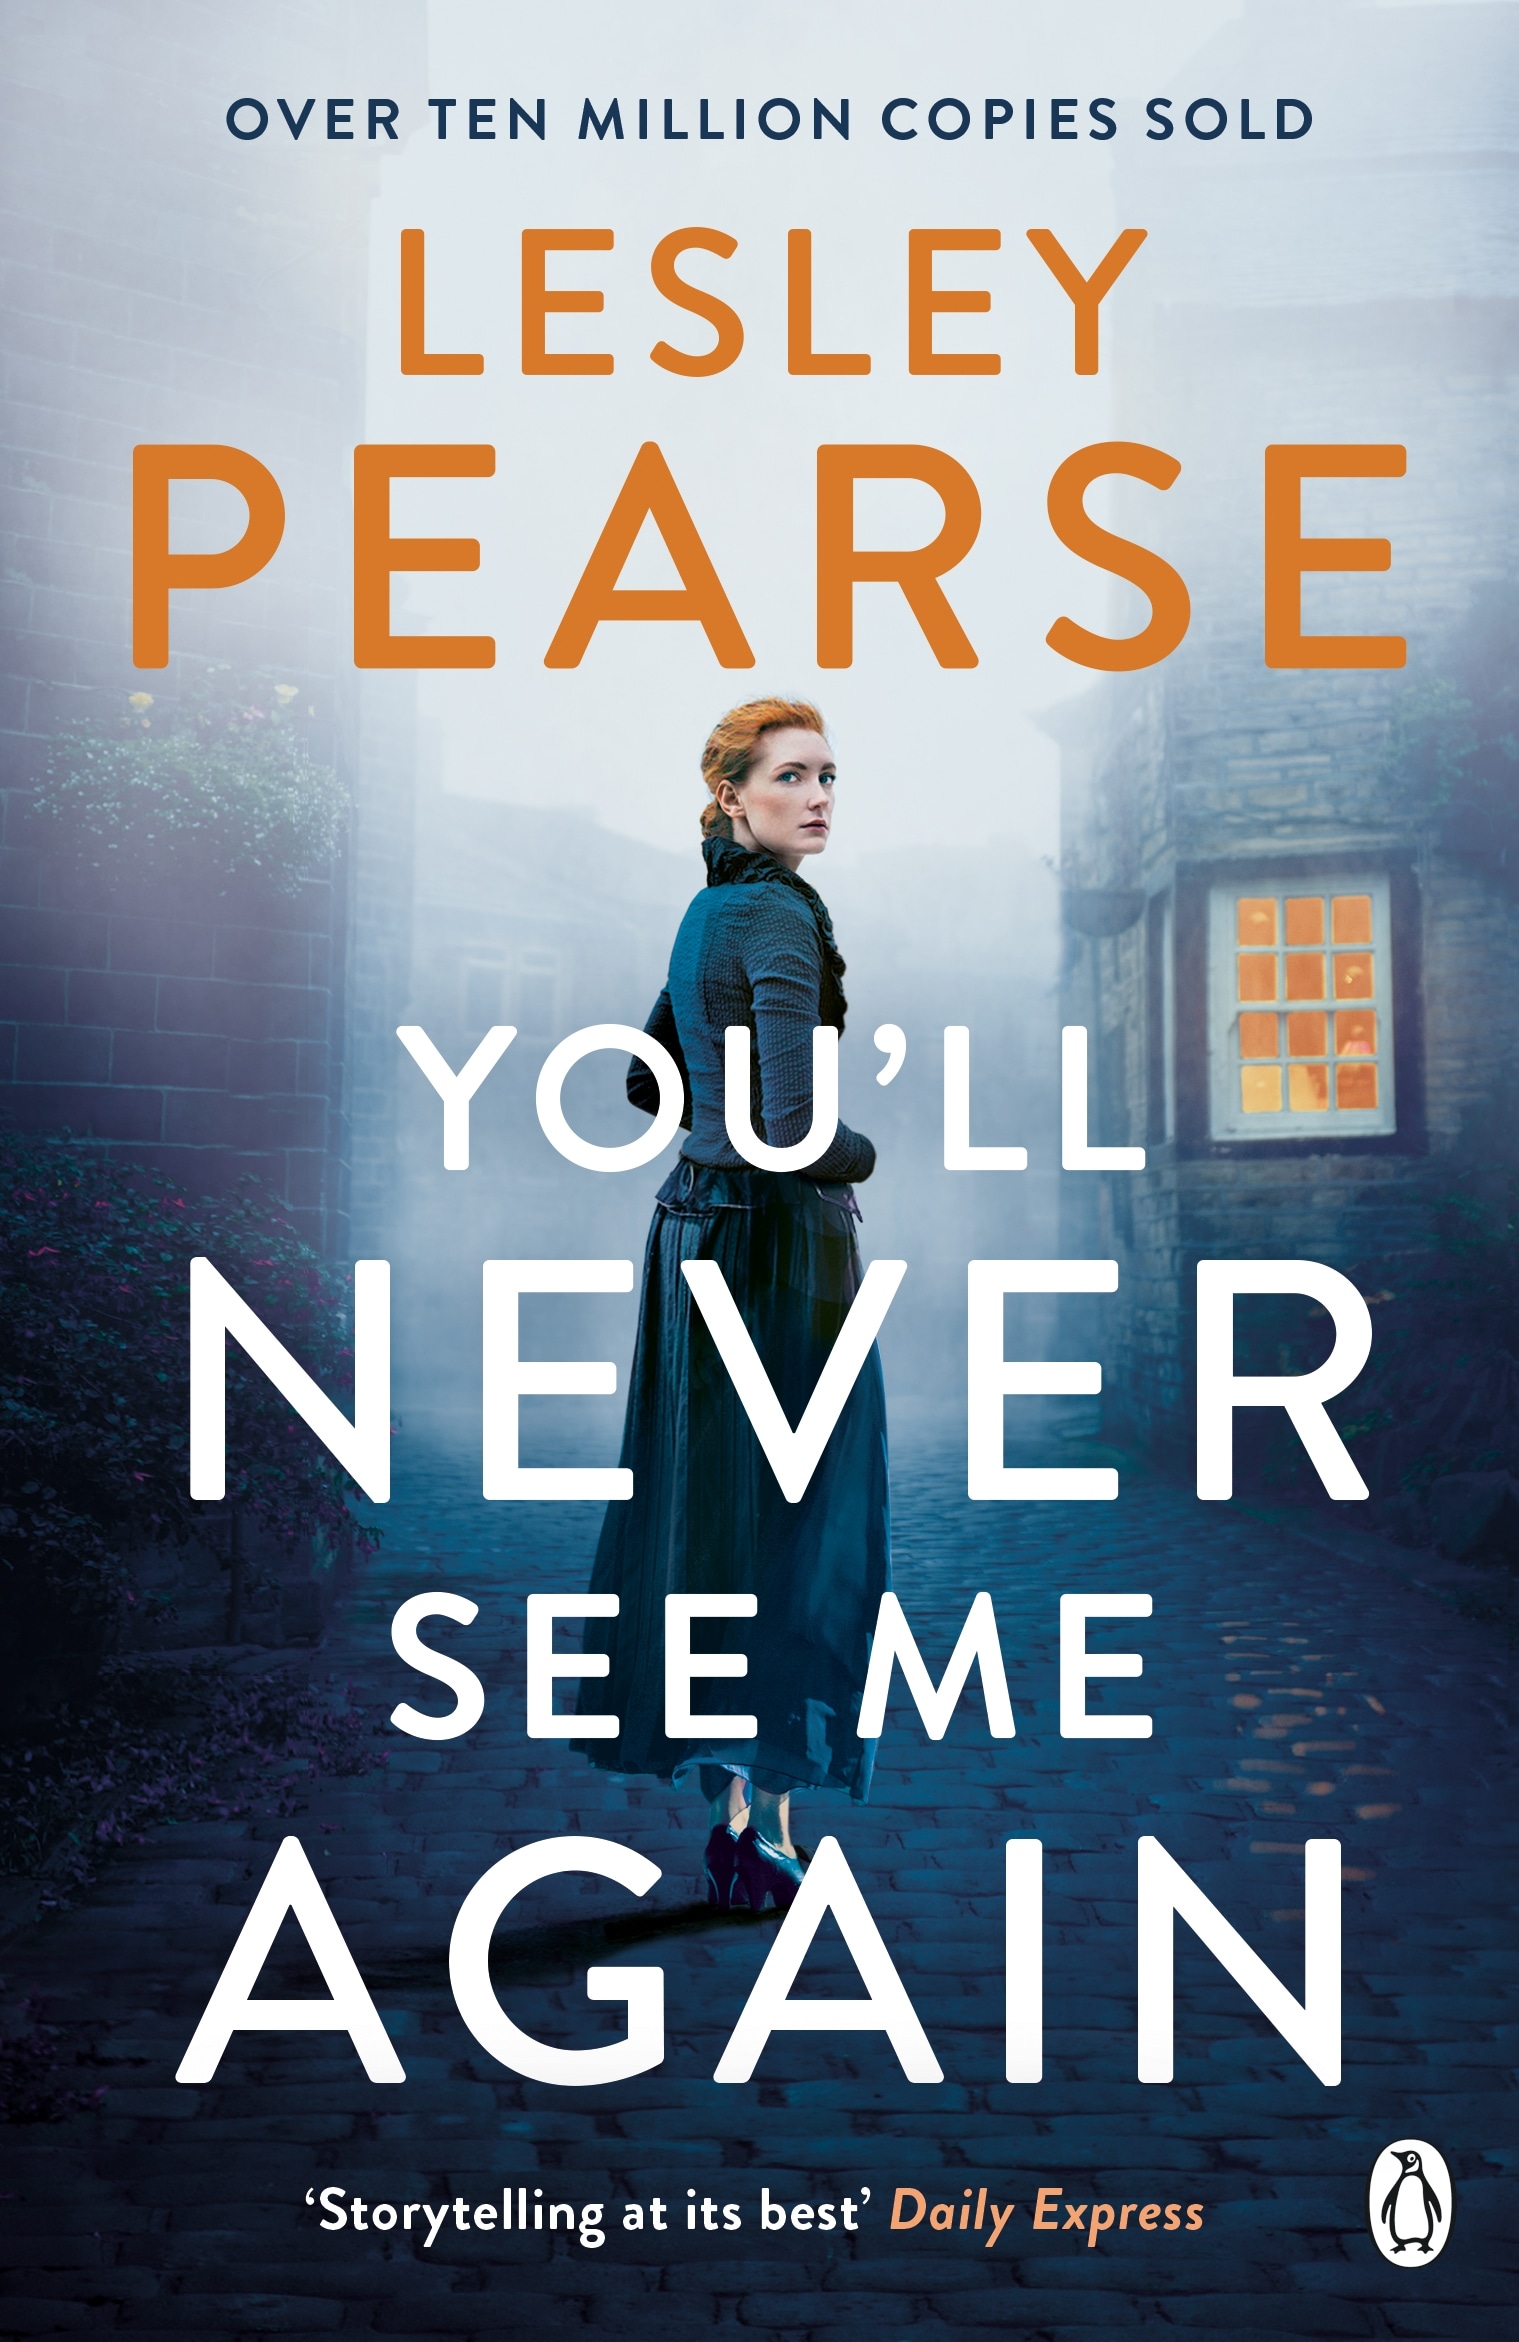 Book “You'll Never See Me Again” by Lesley Pearse — March 5, 2020